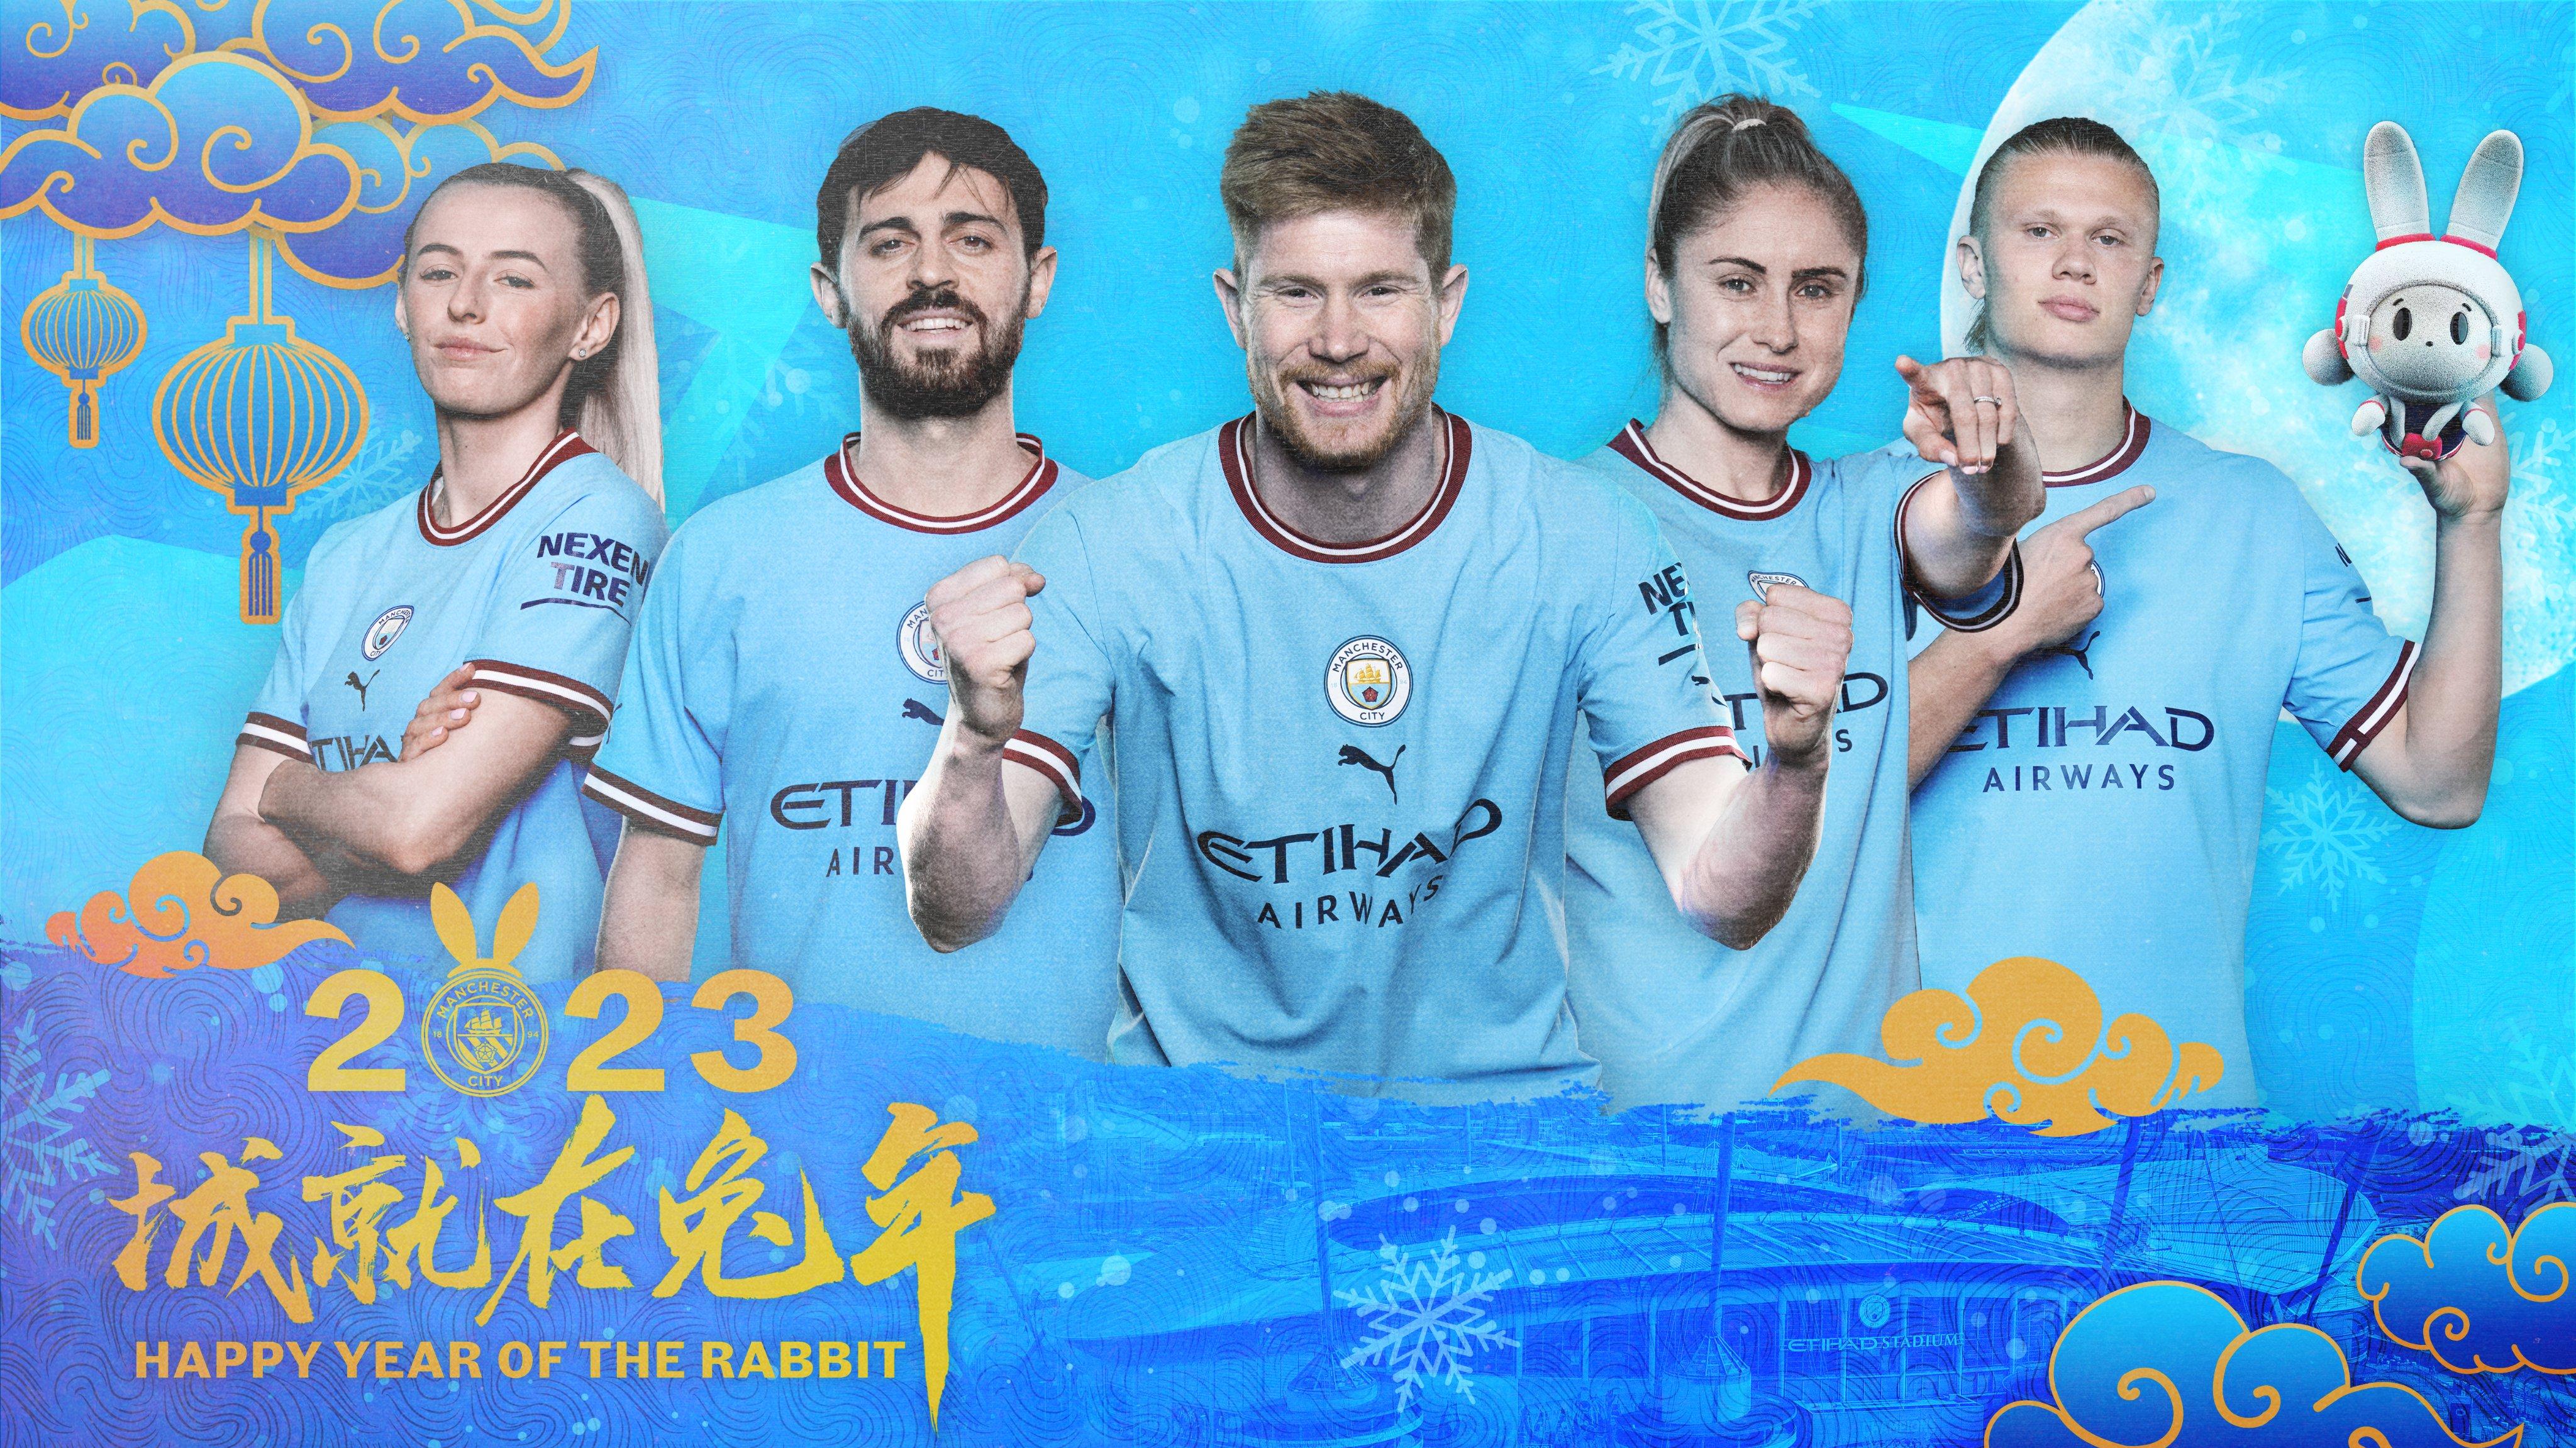 Manchester City on We wish you a Happy Year of the